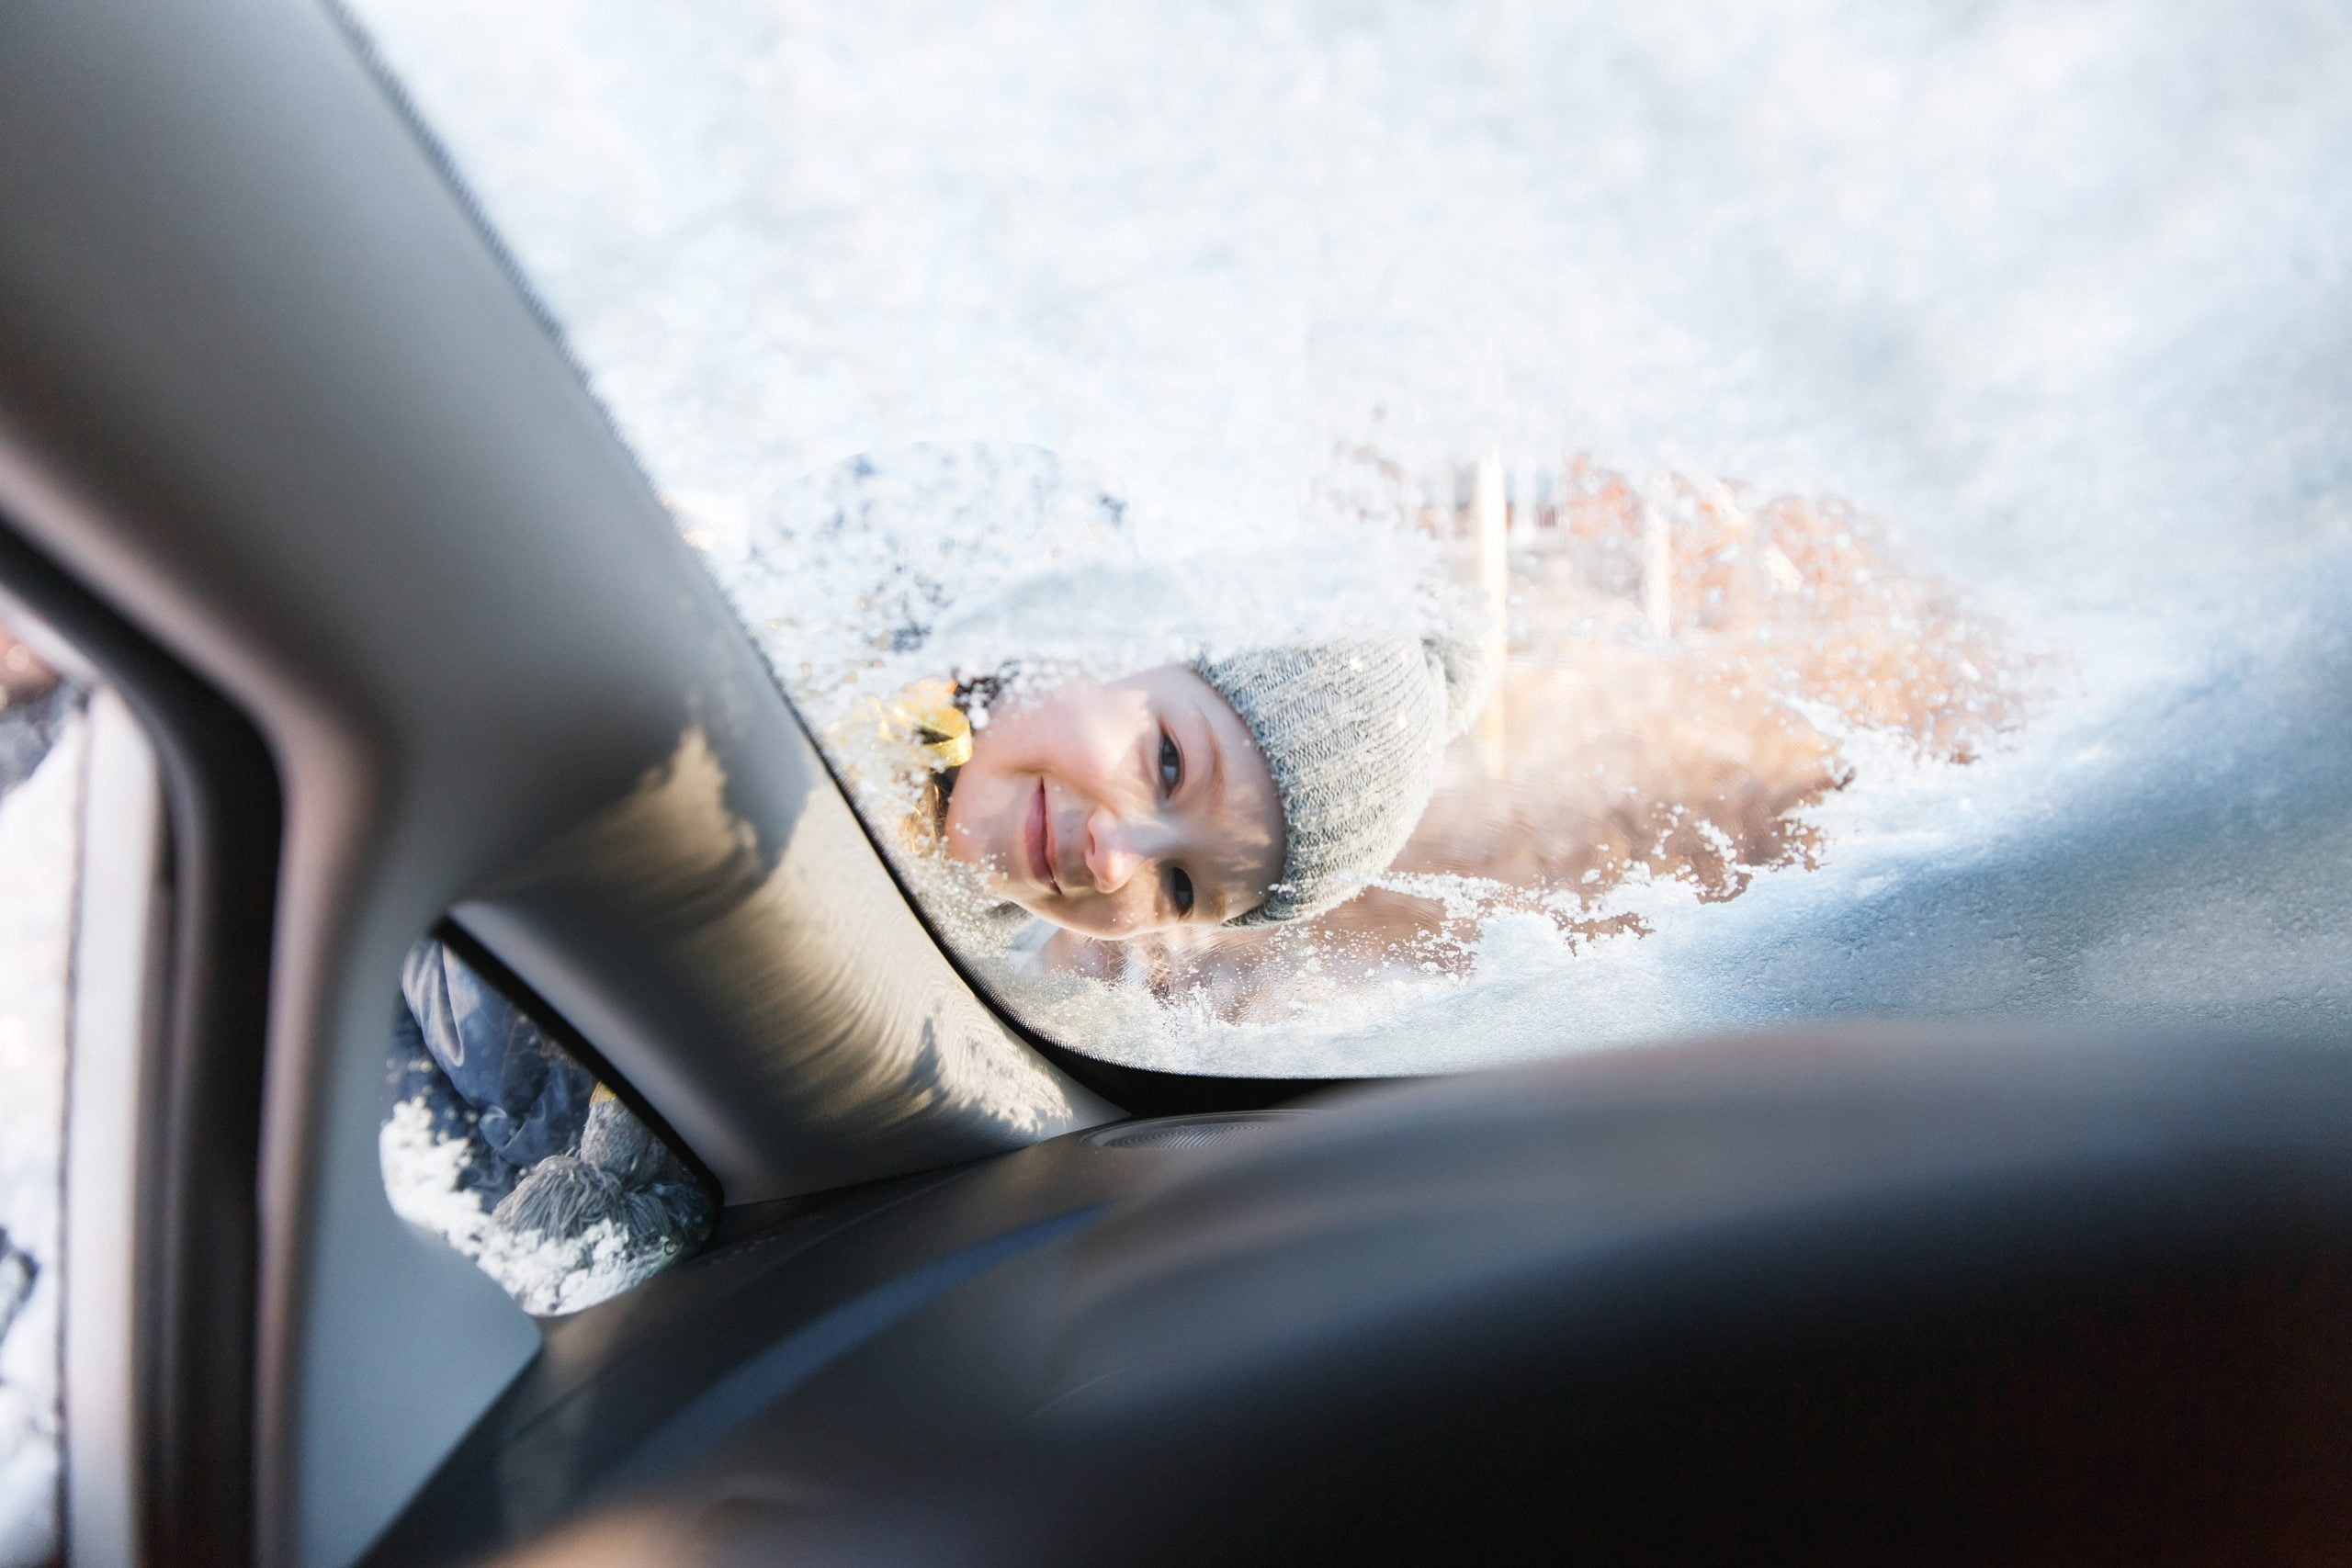 https://www.paj-gps.de/wp-content/uploads/2022/12/the-kid-helps-and-scraping-snow-and-ice-from-car-w-2022-11-10-08-20-17-utc-scaled.jpg